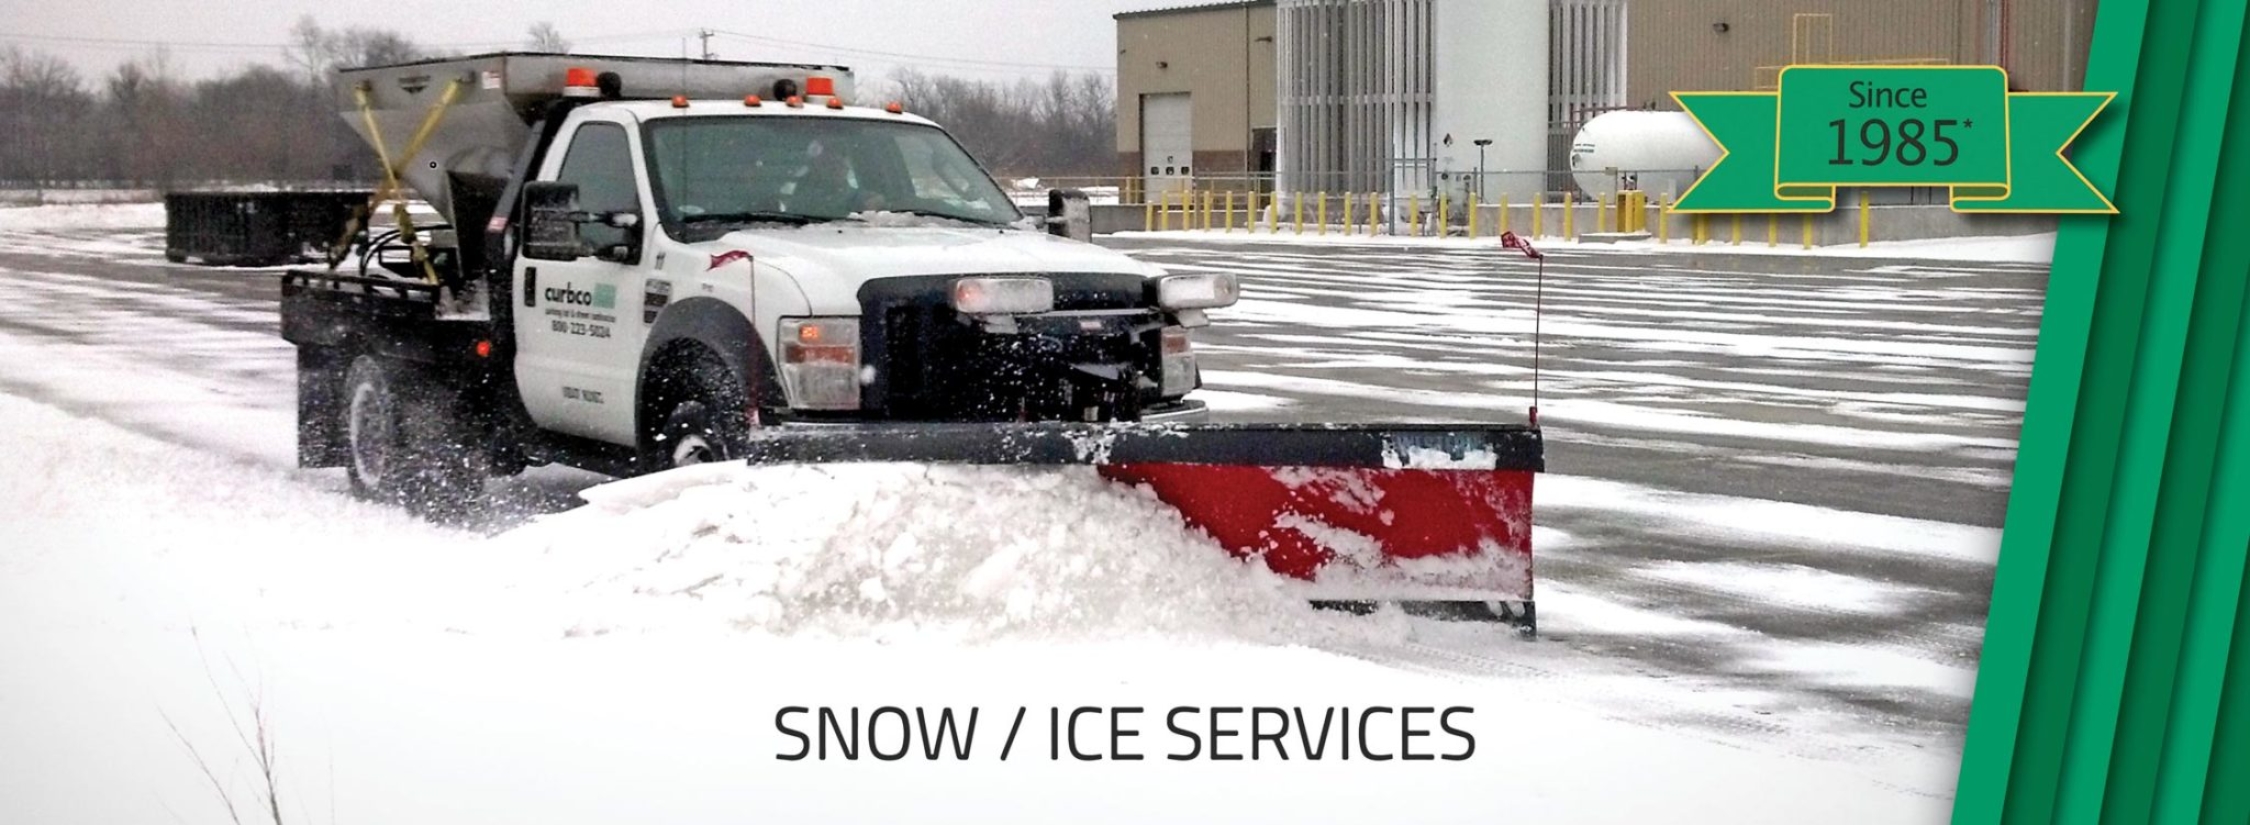 Curbco-Commercial-Industrial-Municipal-Snow_Ice